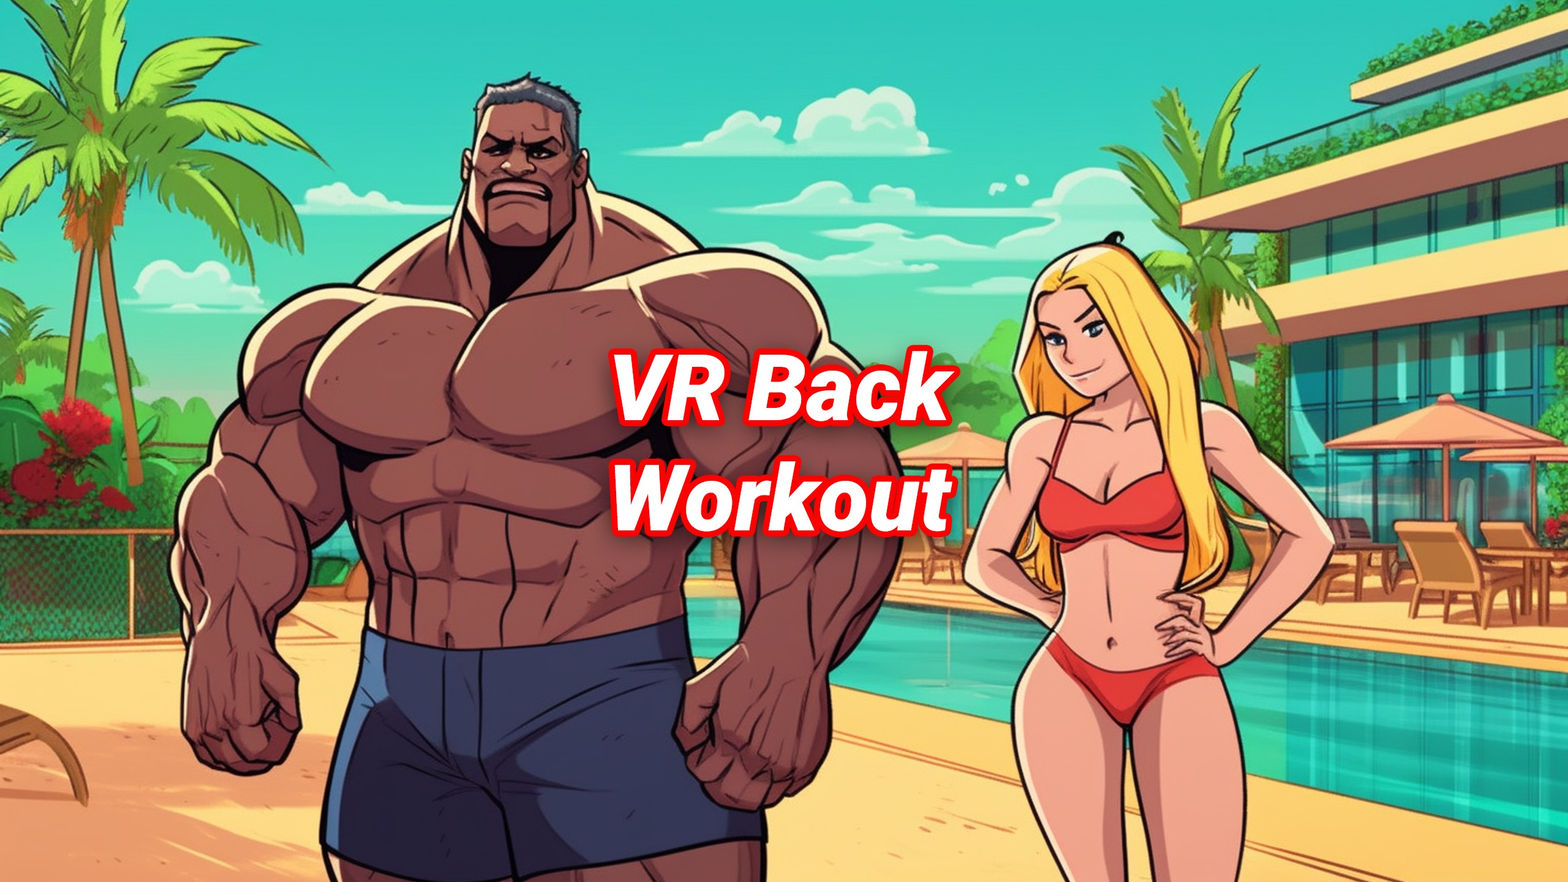 VR Back Workout: A fun way to strengthen your back